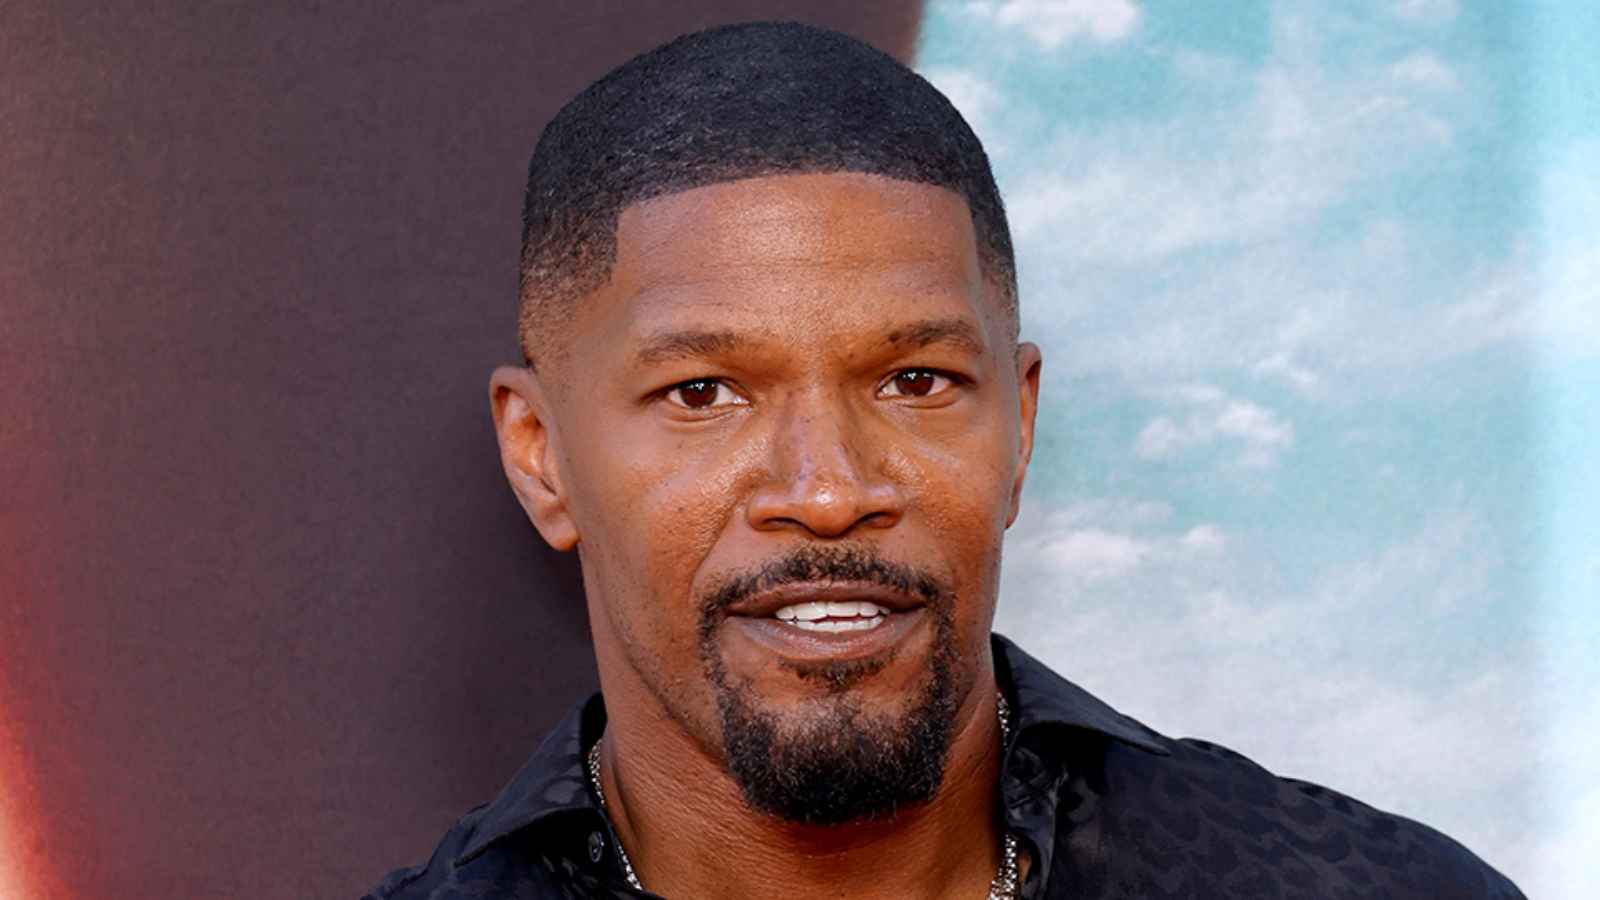 Jamie Foxx Illness: Hospitalized After Medical Complications, Statement Regarding Family Matters